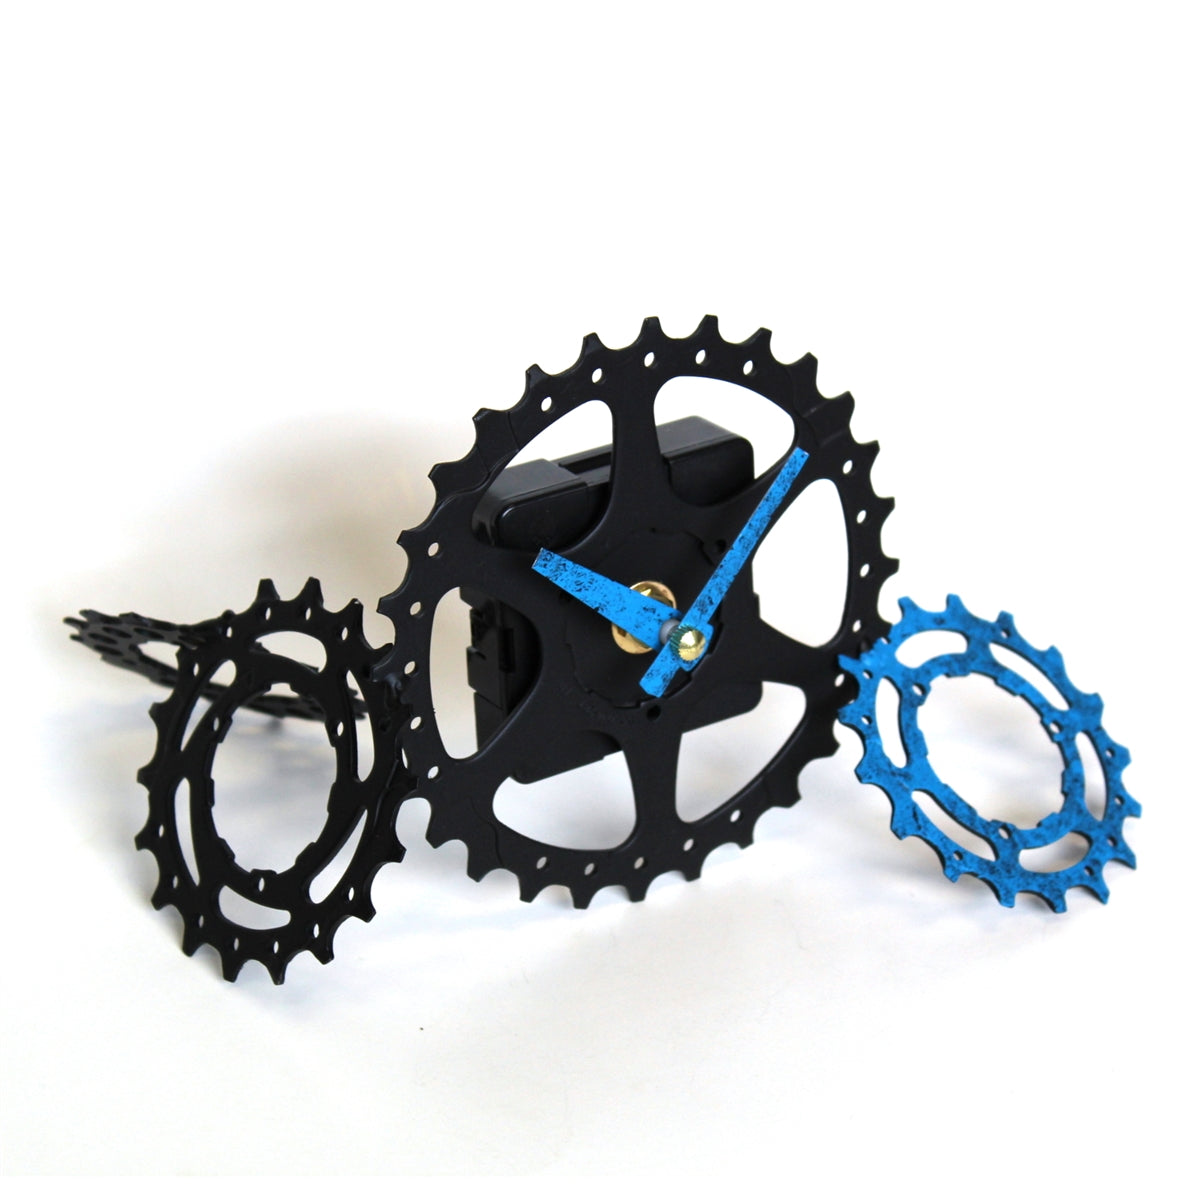 Recycled Scattered Gear Desk Clock Black And Blue Kickstand Culture